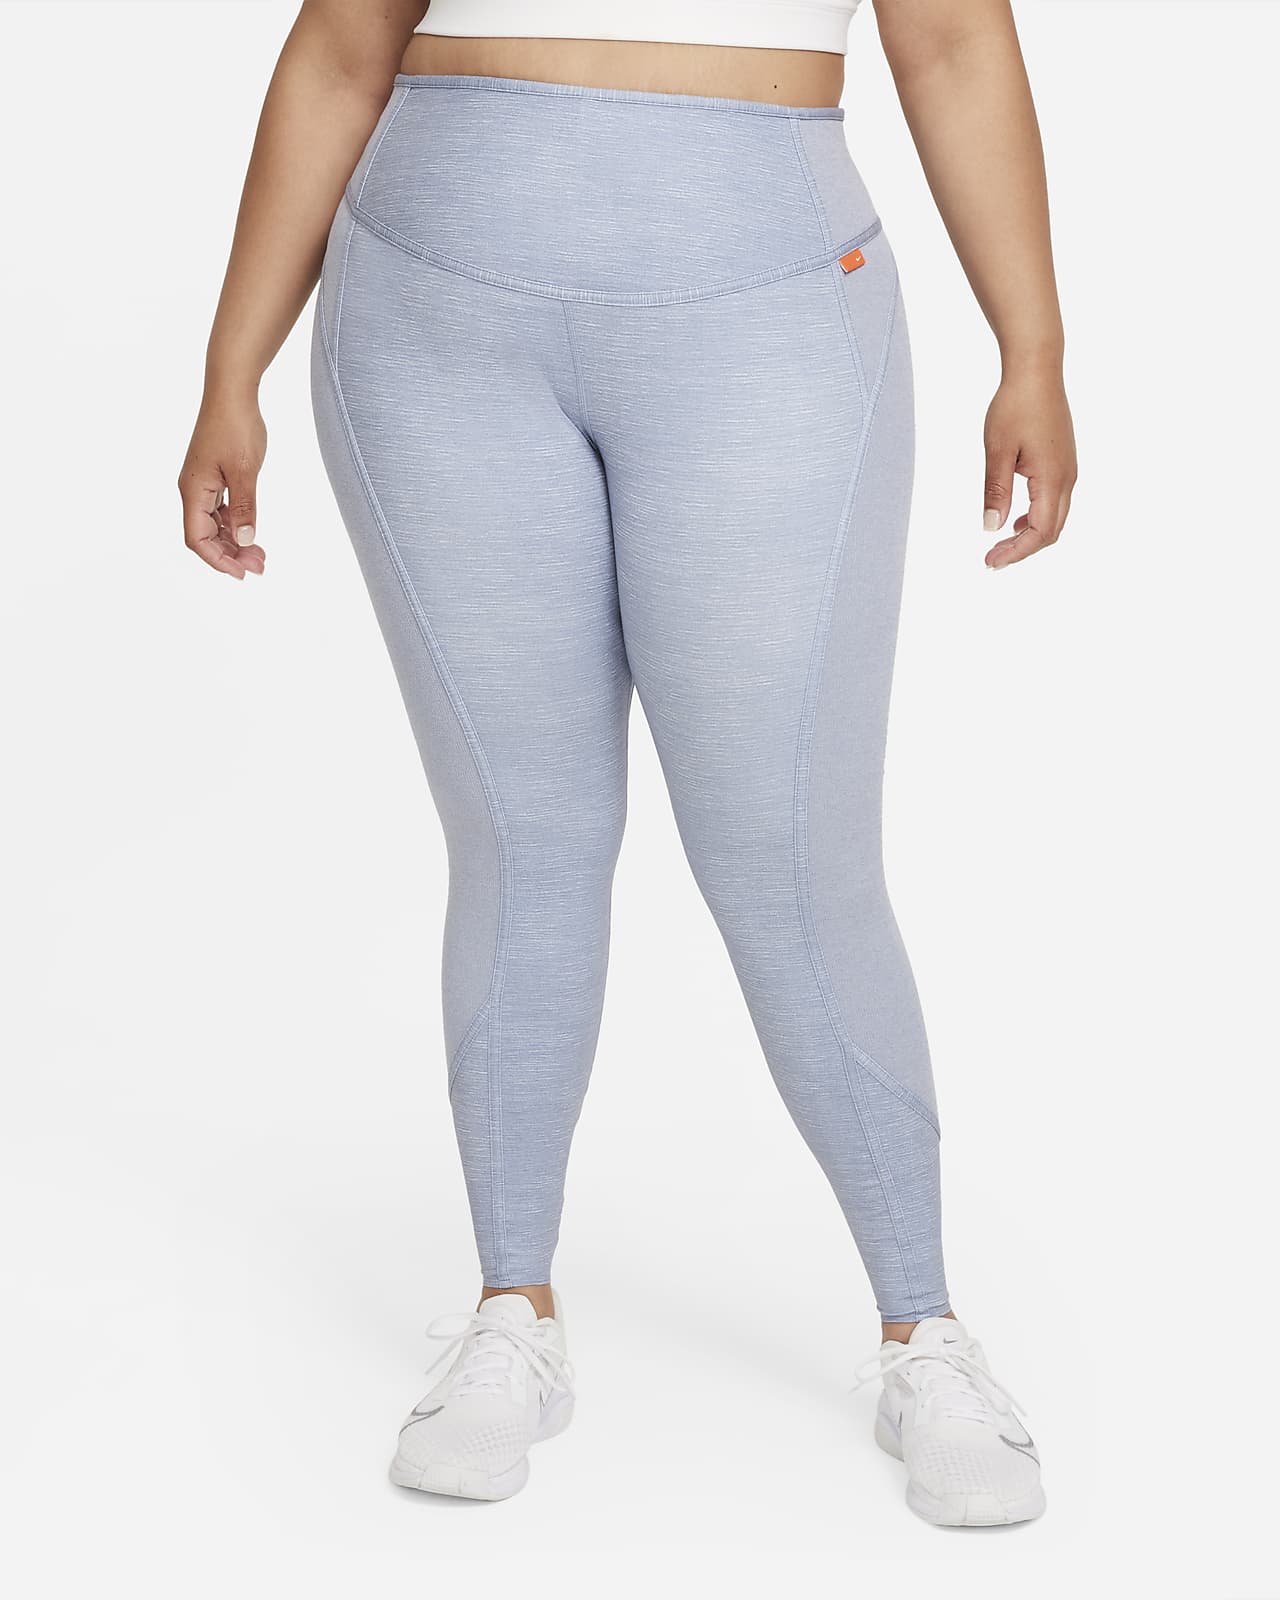 Bijdrage hypothese fragment Nike Dri-FIT One Luxe Women's Mid-Rise Leggings (Plus Size). Nike.com